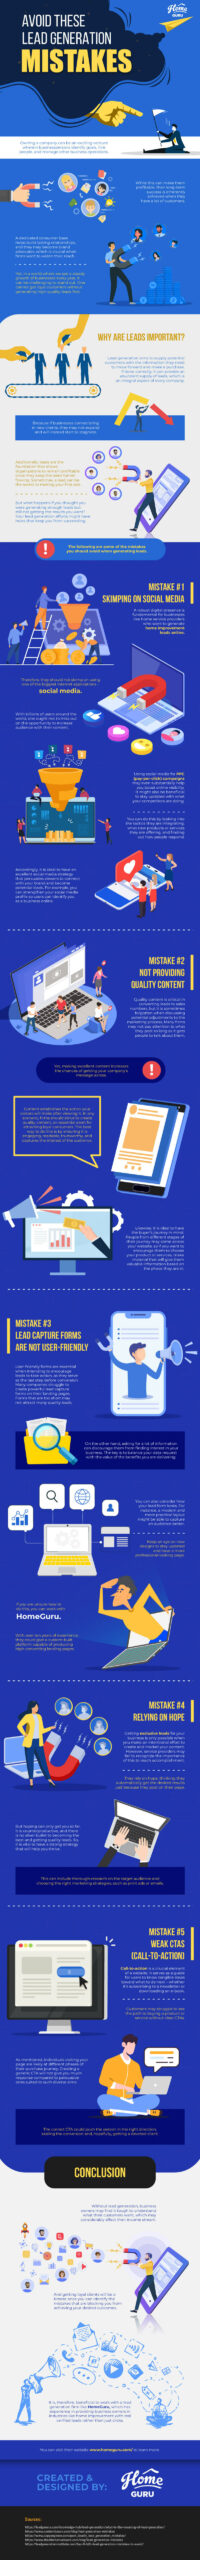 infographic-about-avoiding-exclusive-lead-generation-mistake